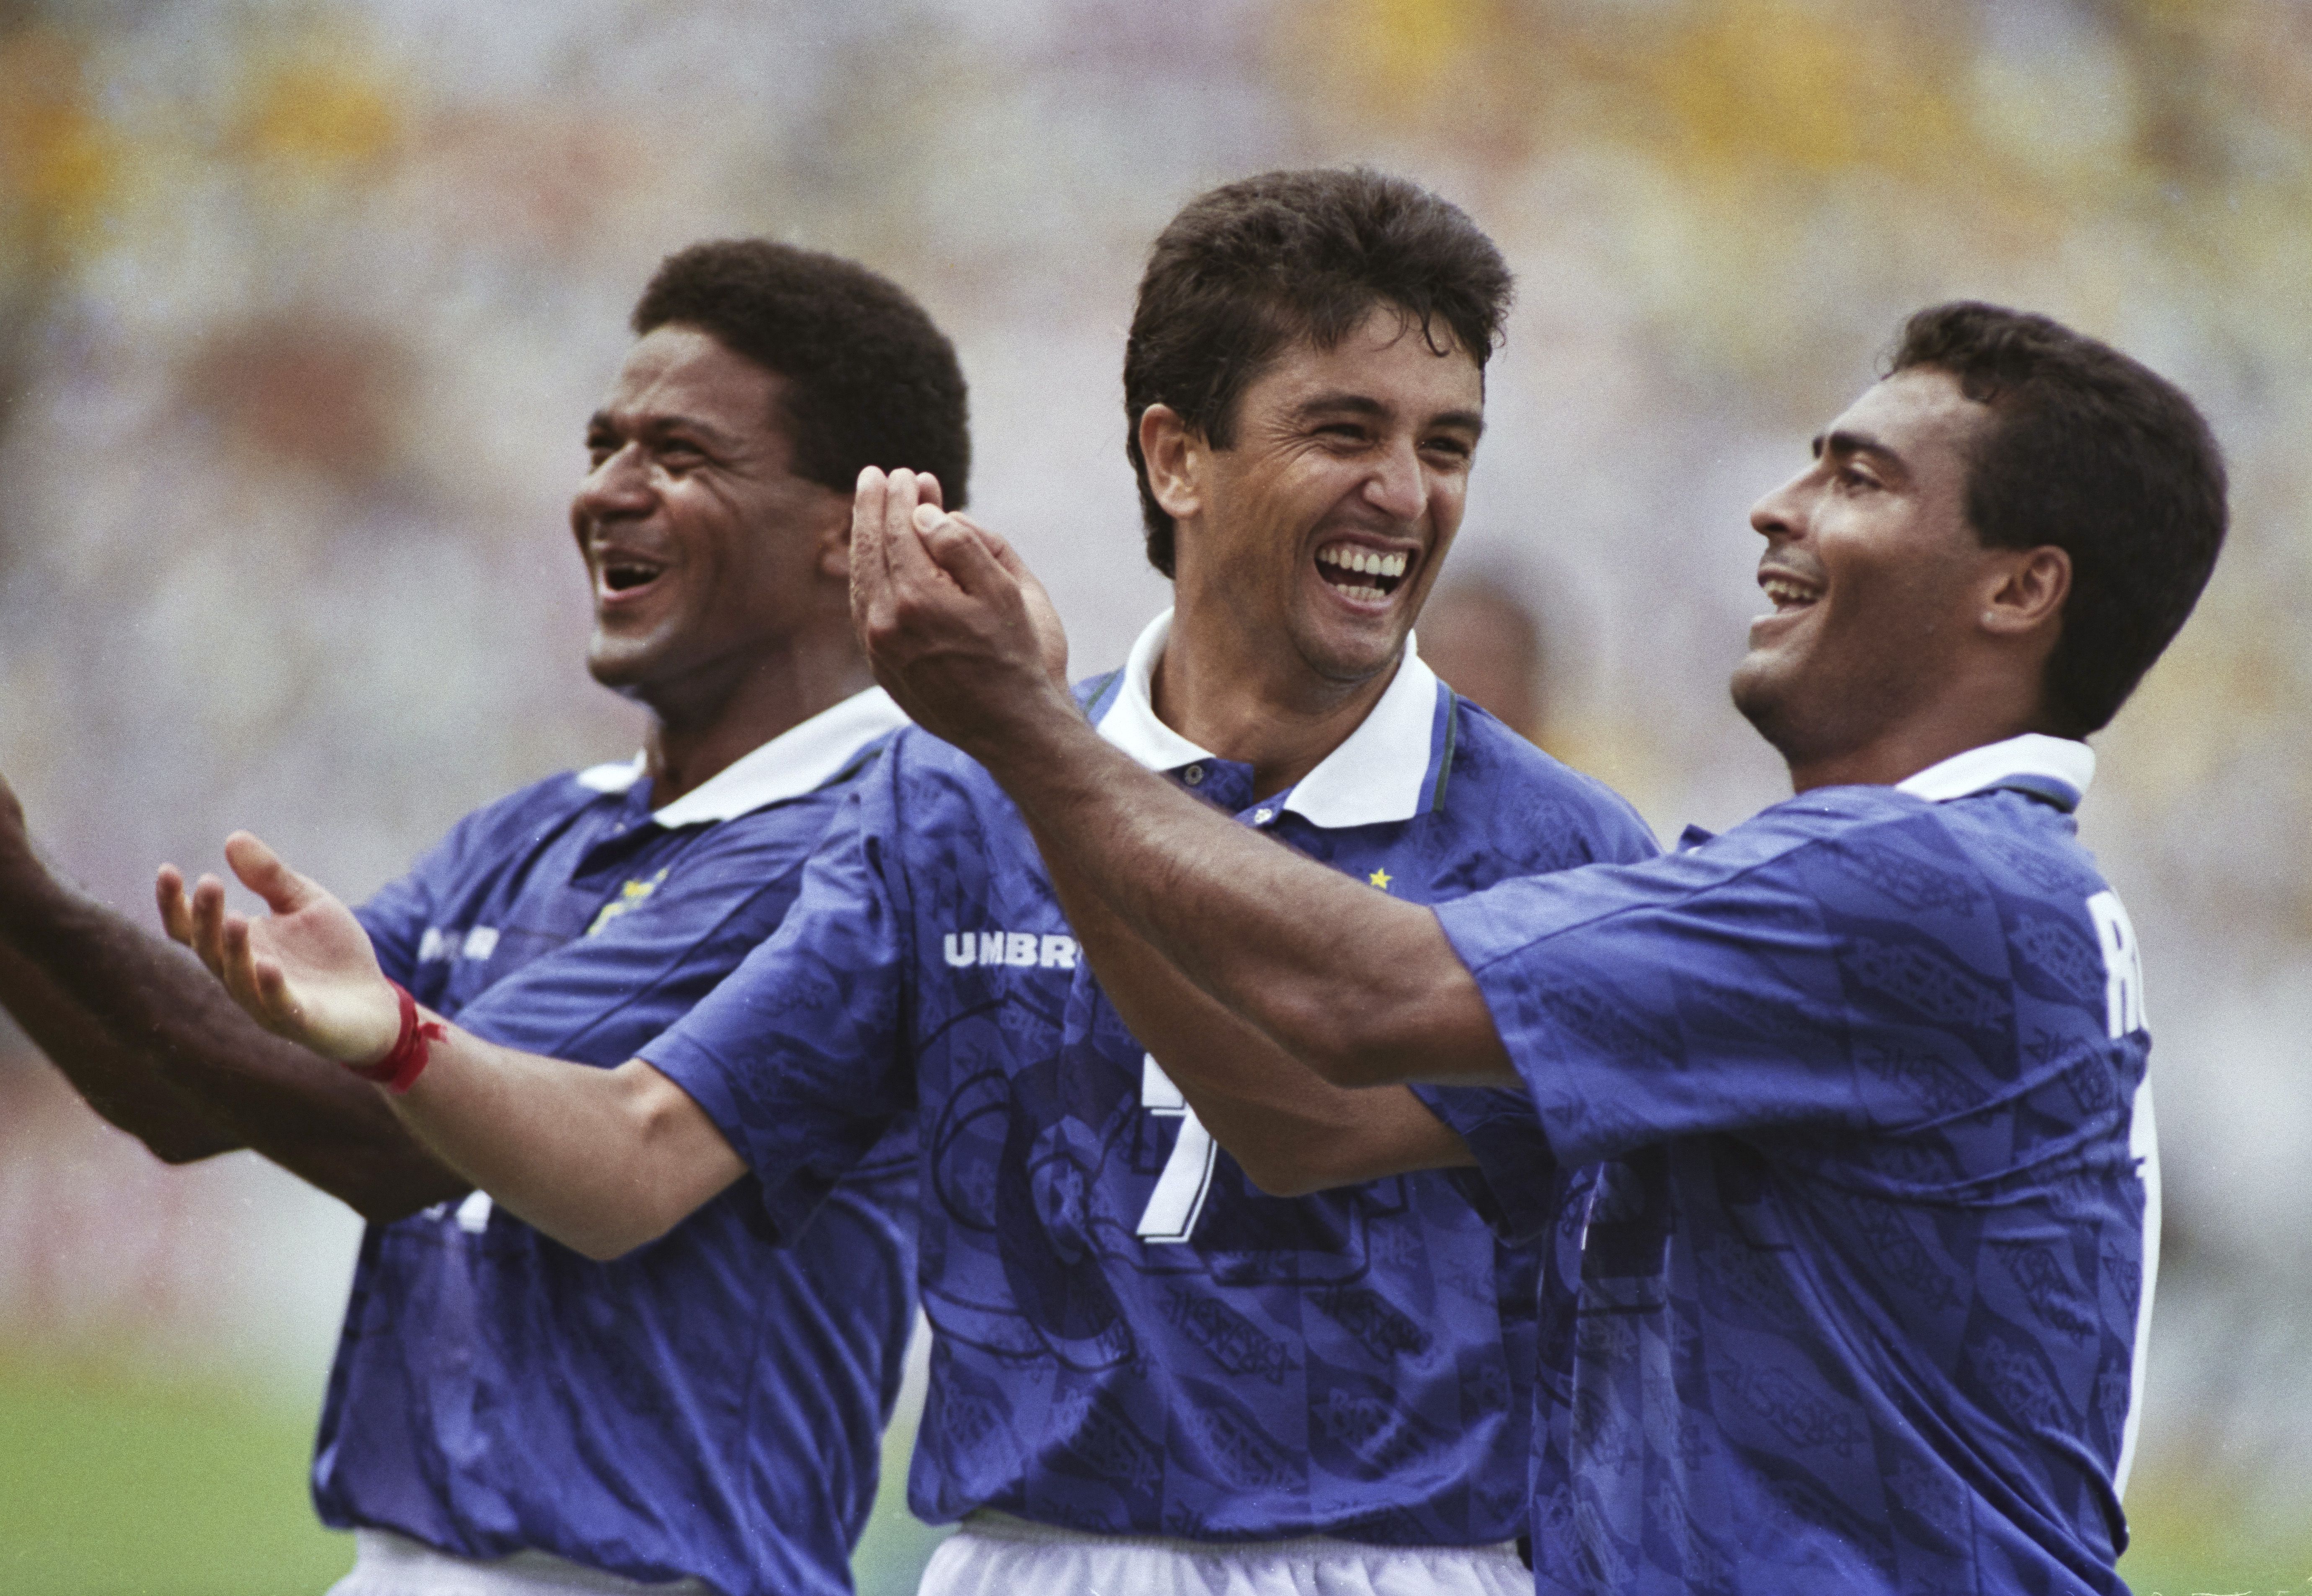 Three soccer players dressed in blue celebrate a goal.